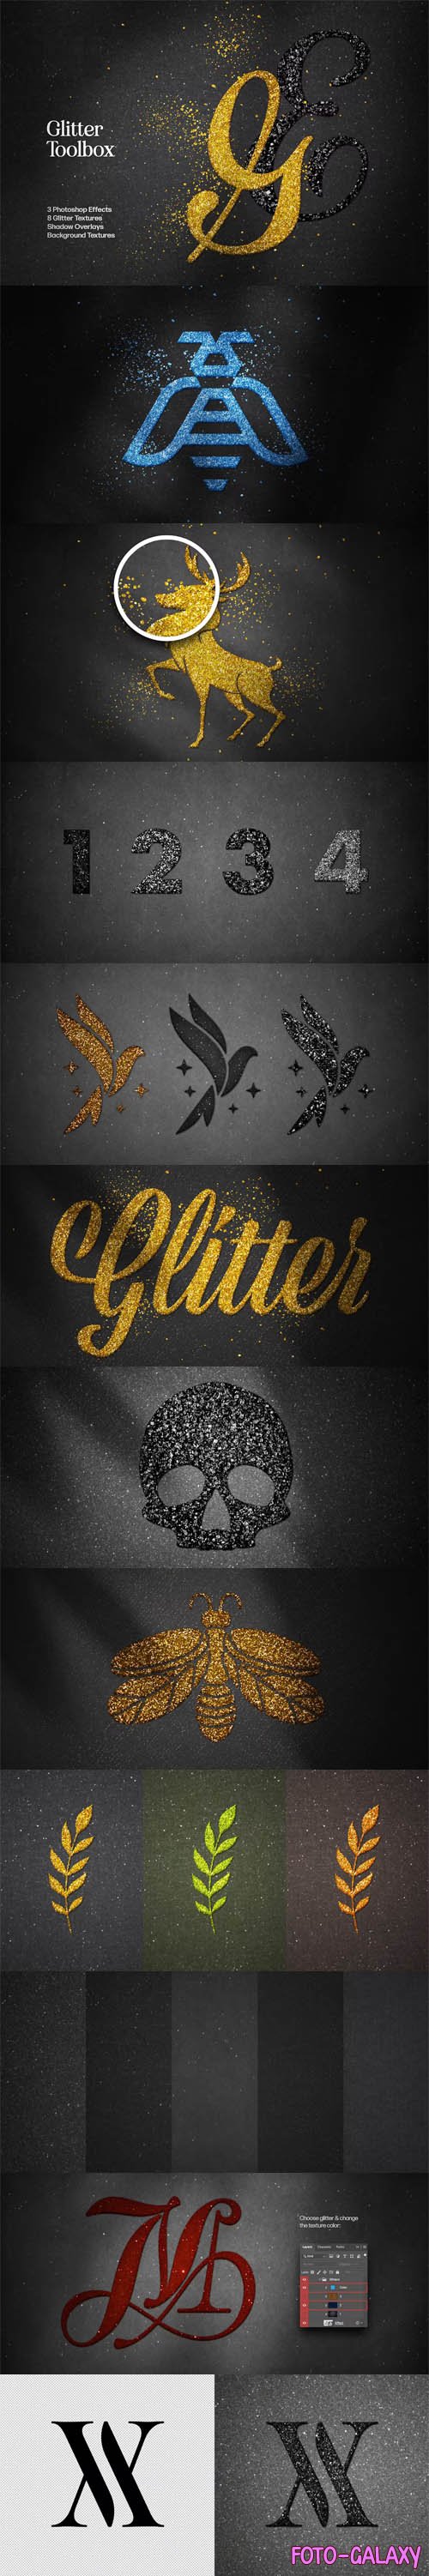 Glitter Toolbox - Photoshop Effects Collection